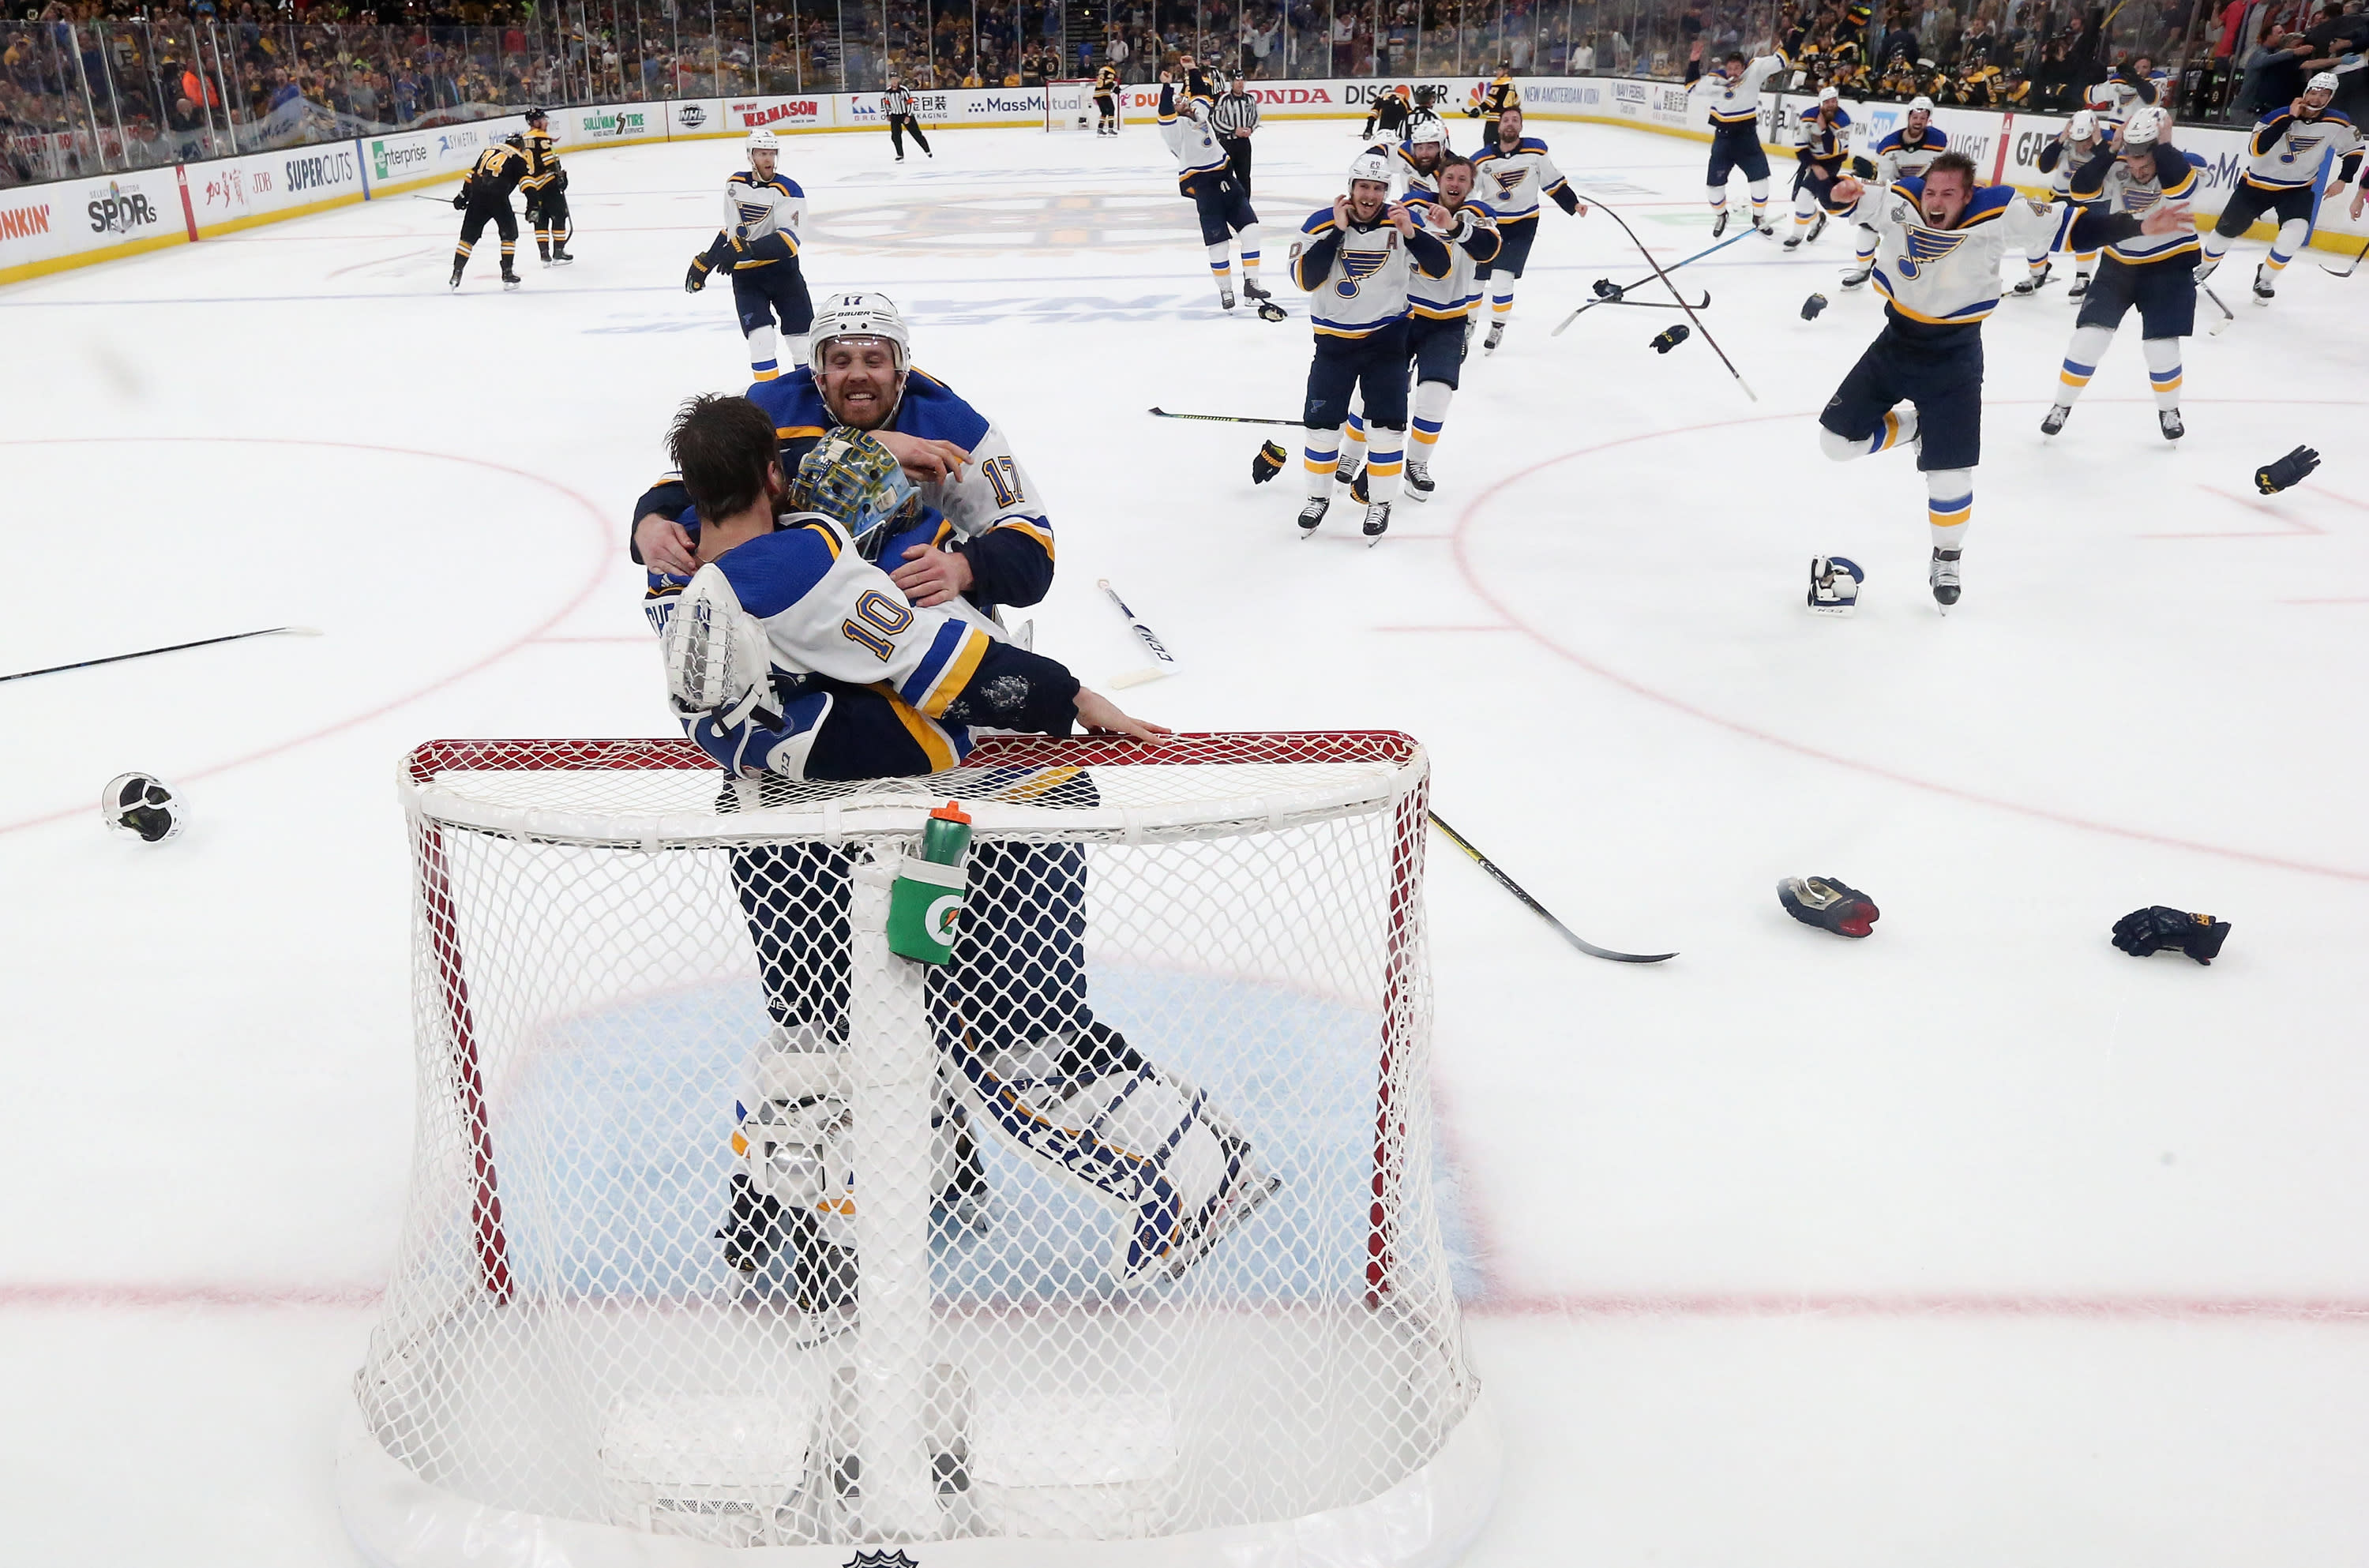 St. Louis Blues win the Stanley Cup